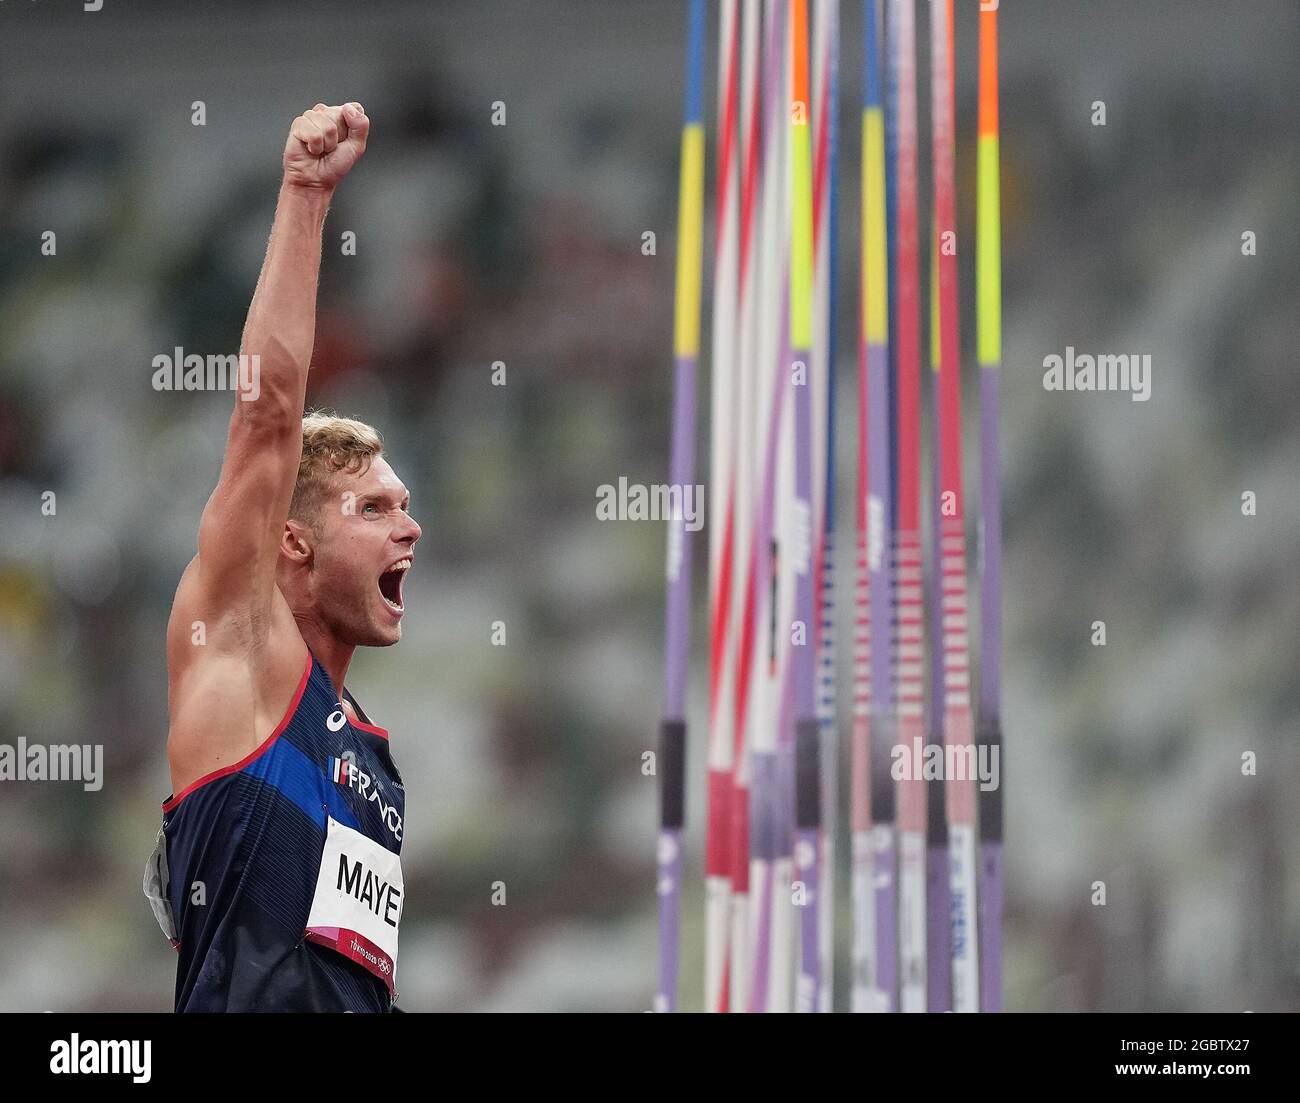 Tokyo, Japan. 5th Aug, 2021. Kevin Mayer of France reacts during the Men's Decathlon Javelin Throw at the Tokyo 2020 Olympic Games in Tokyo, Japan, Aug. 5, 2021. Credit: Li Yibo/Xinhua/Alamy Live News Stock Photo